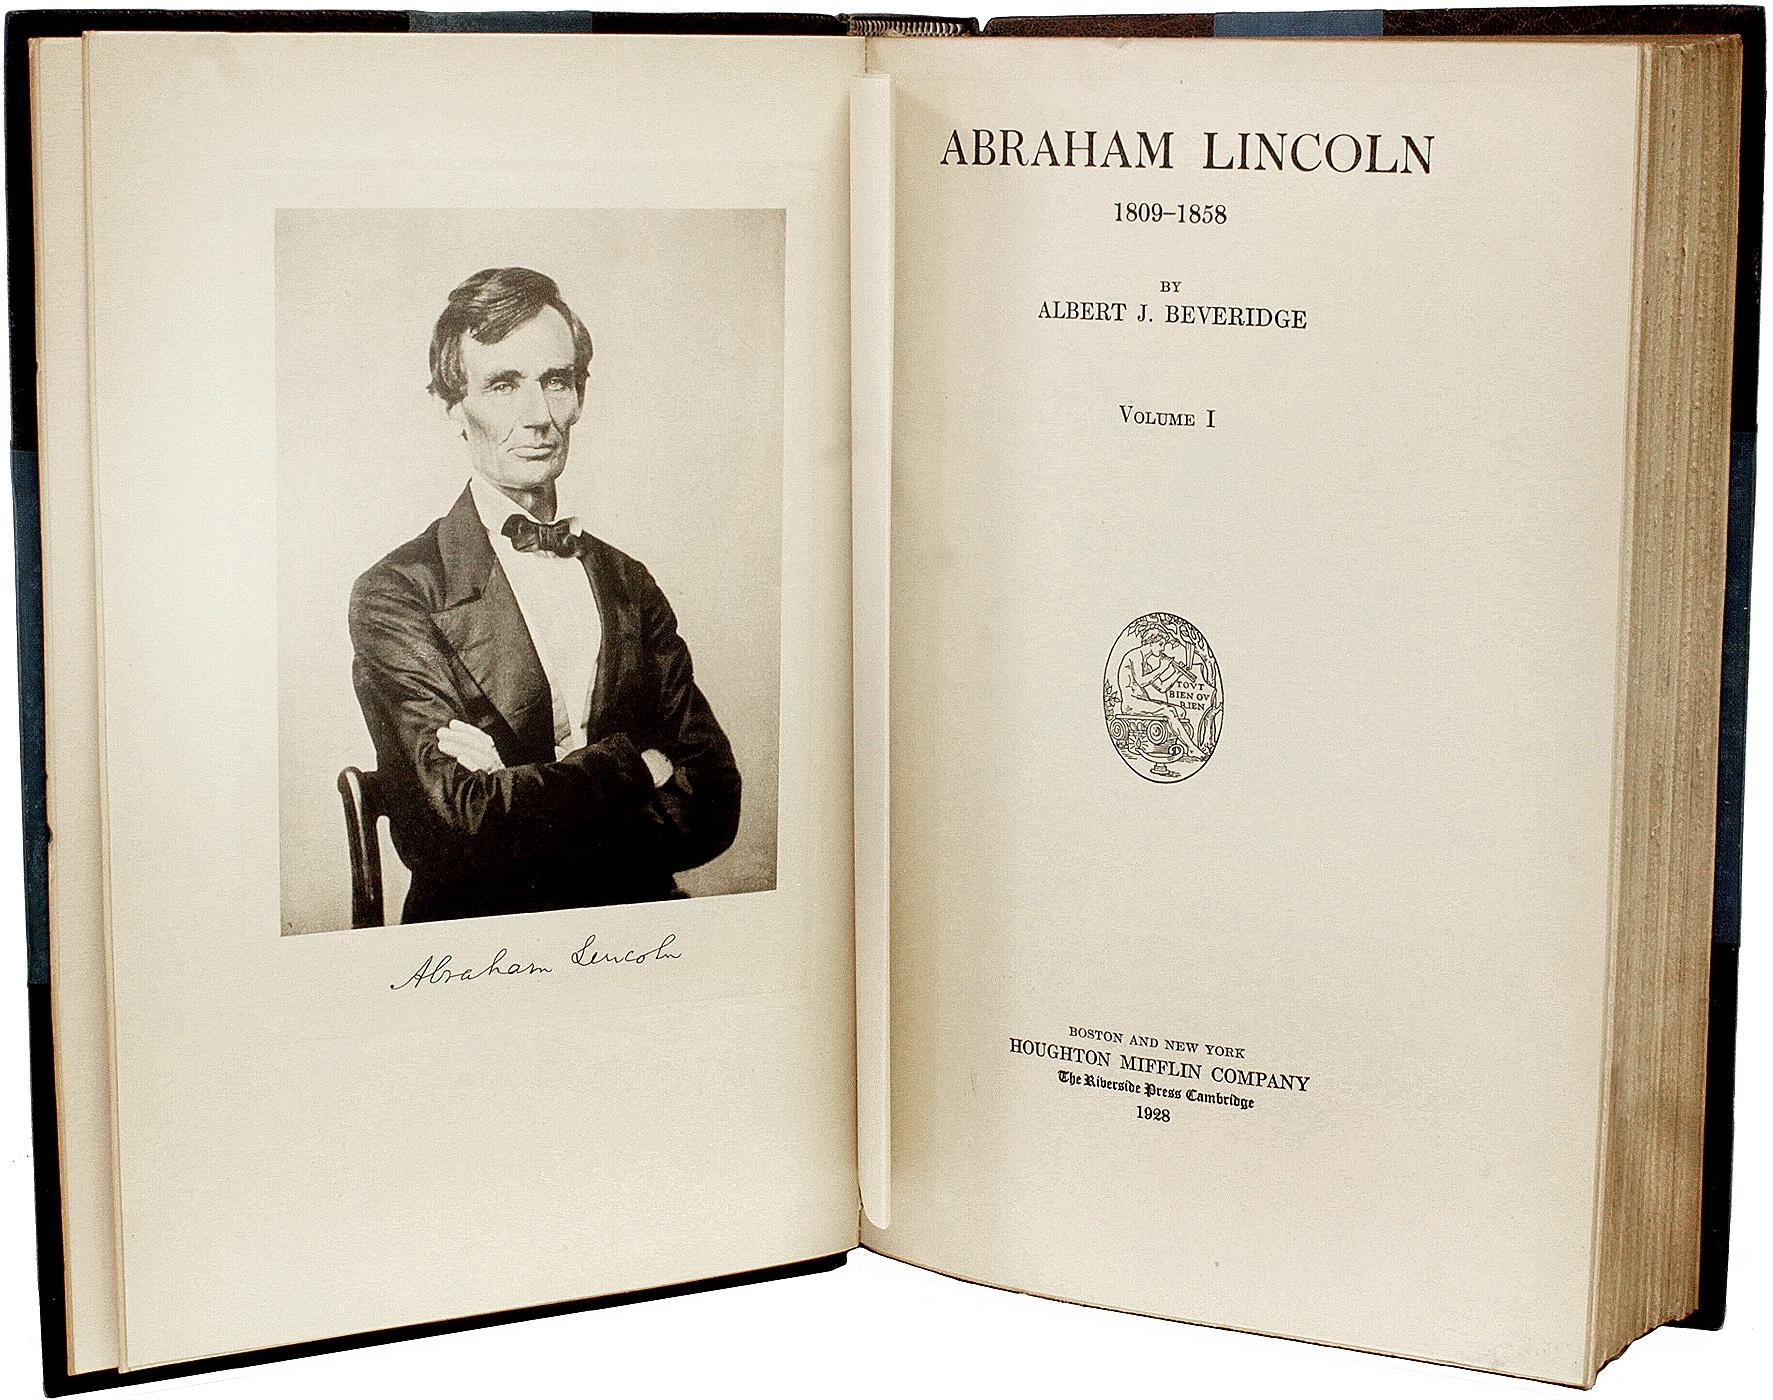 American BEVERIDGE, Albert J.. Abraham Lincoln 1809-1858. 2 VOLUMES - FIRST EDITION ! For Sale